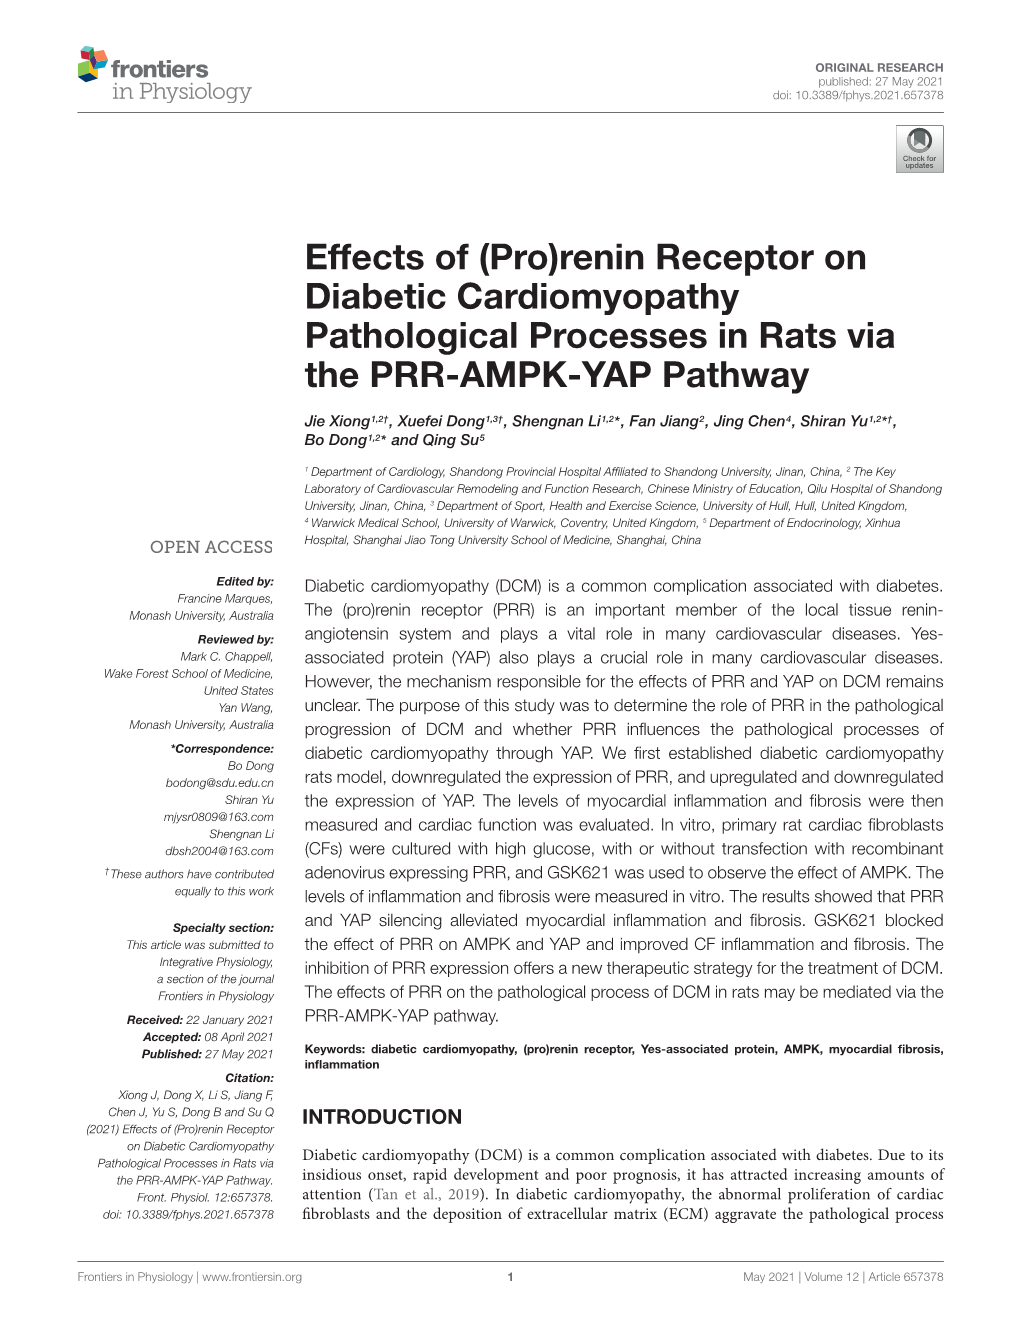 (Pro)Renin Receptor on Diabetic Cardiomyopathy Pathological Processes in Rats Via the PRR-AMPK-YAP Pathway